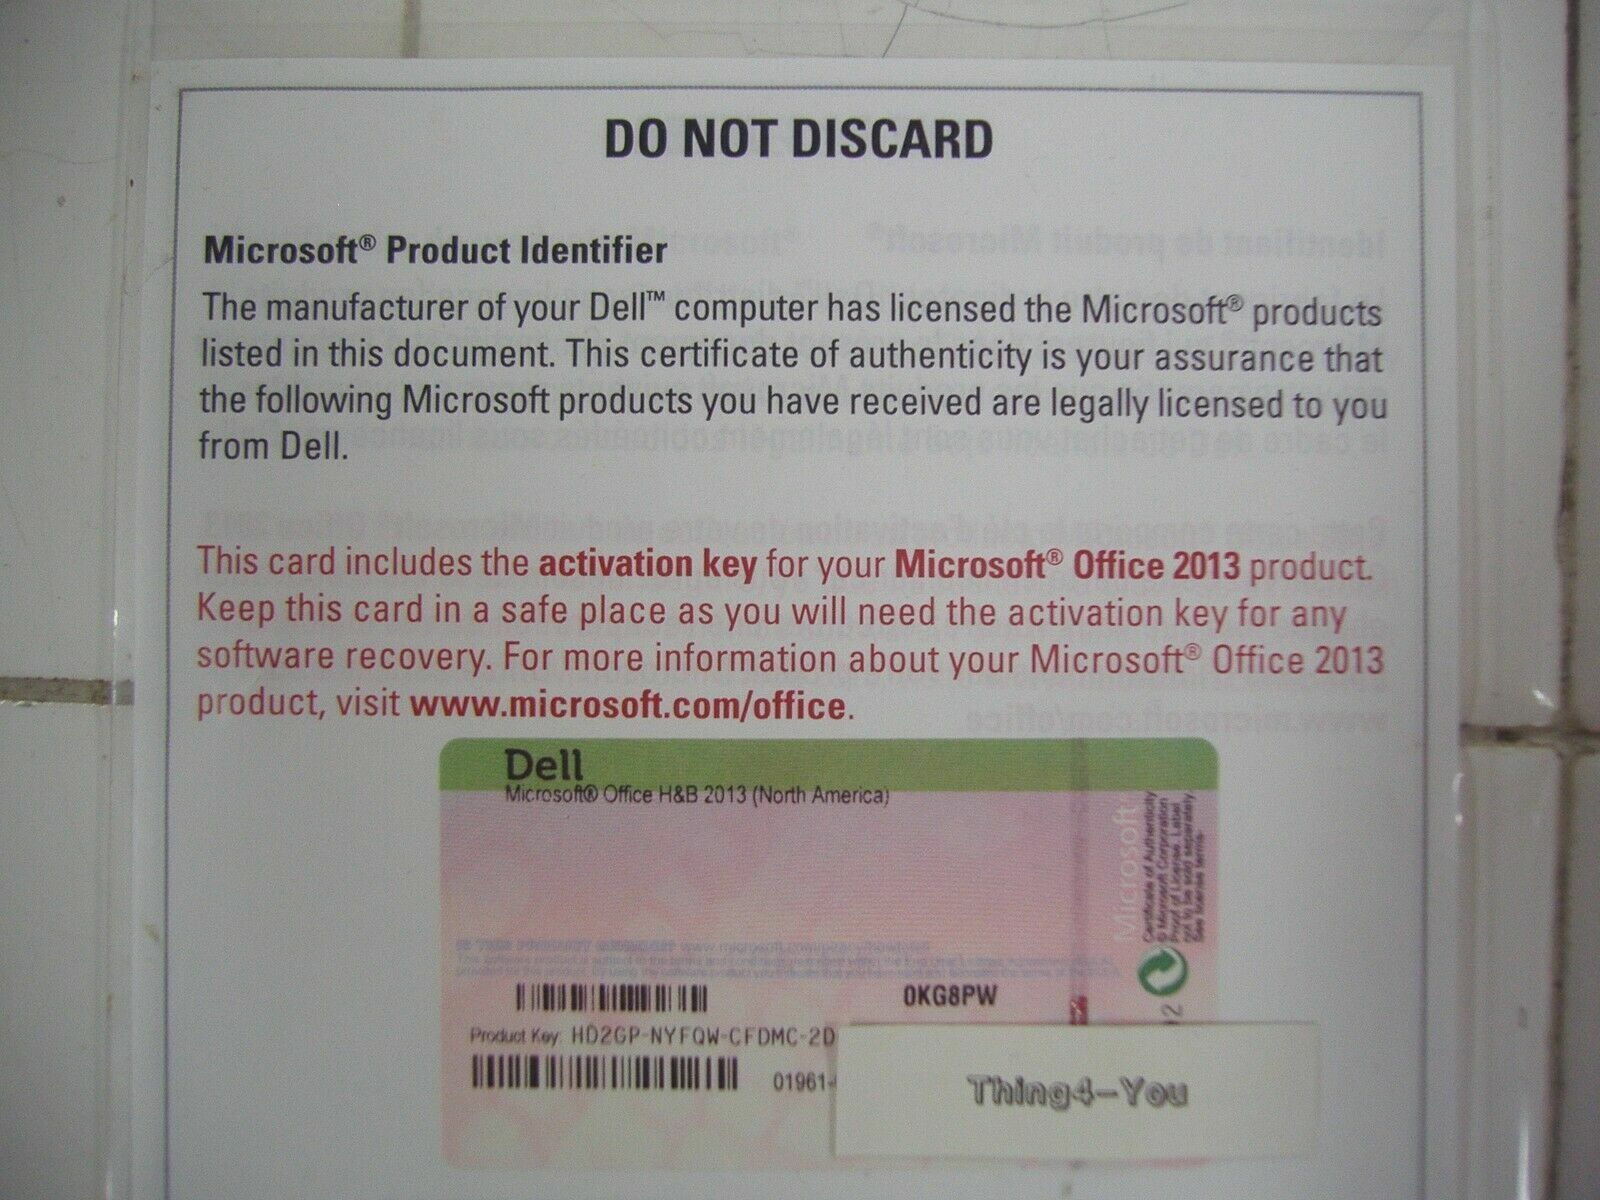 Microsoft Office 2013 Home and Business Full Retail Product Key Card (PKC) =NEW=